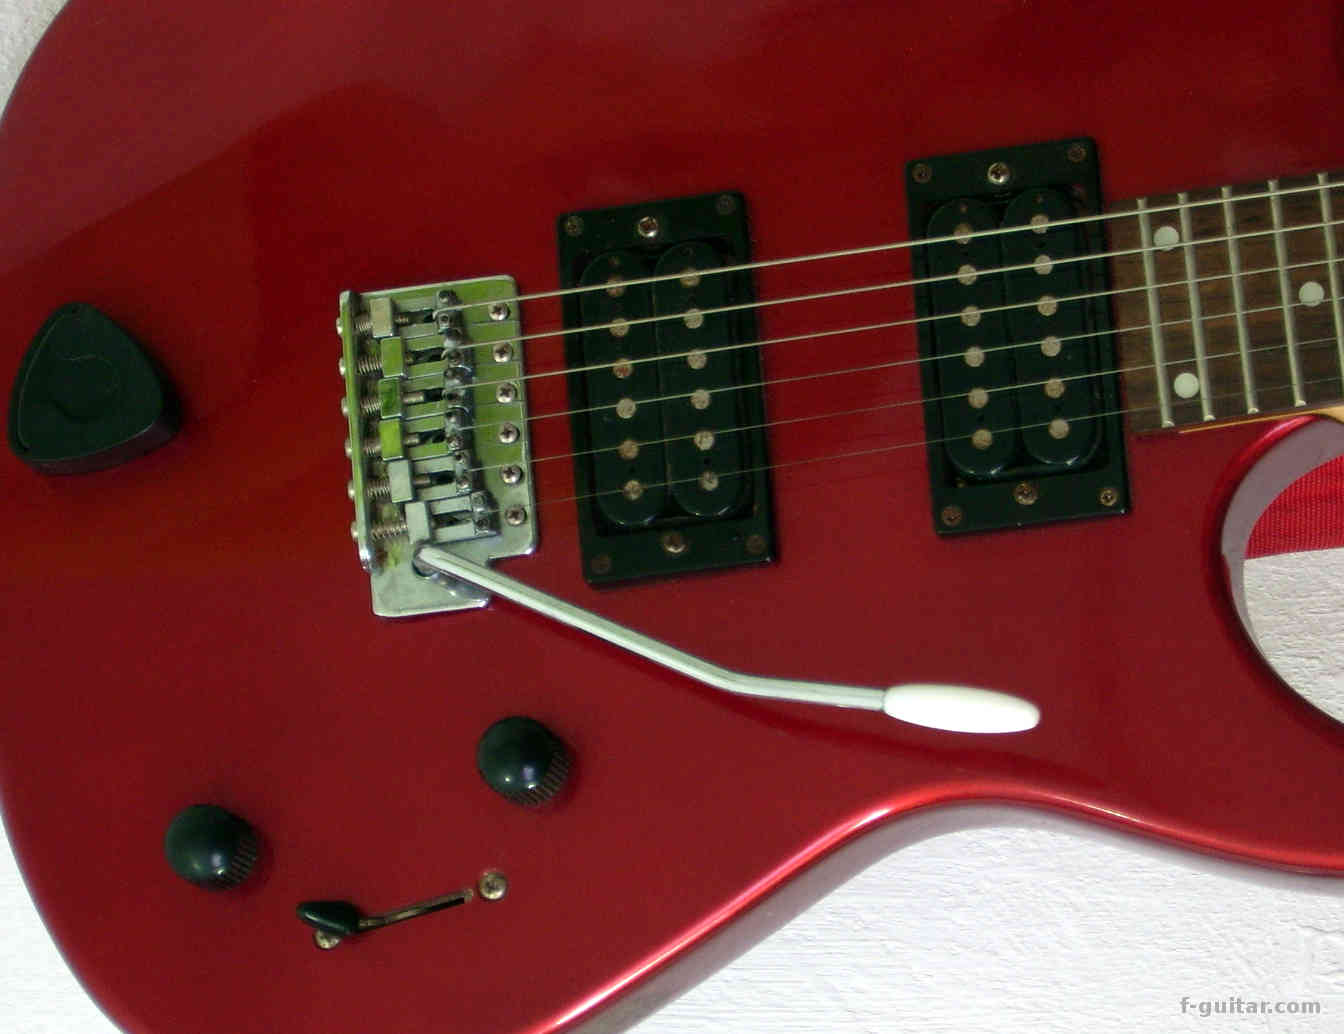 How To Restring An Electric Guitar With A Whammy Bar